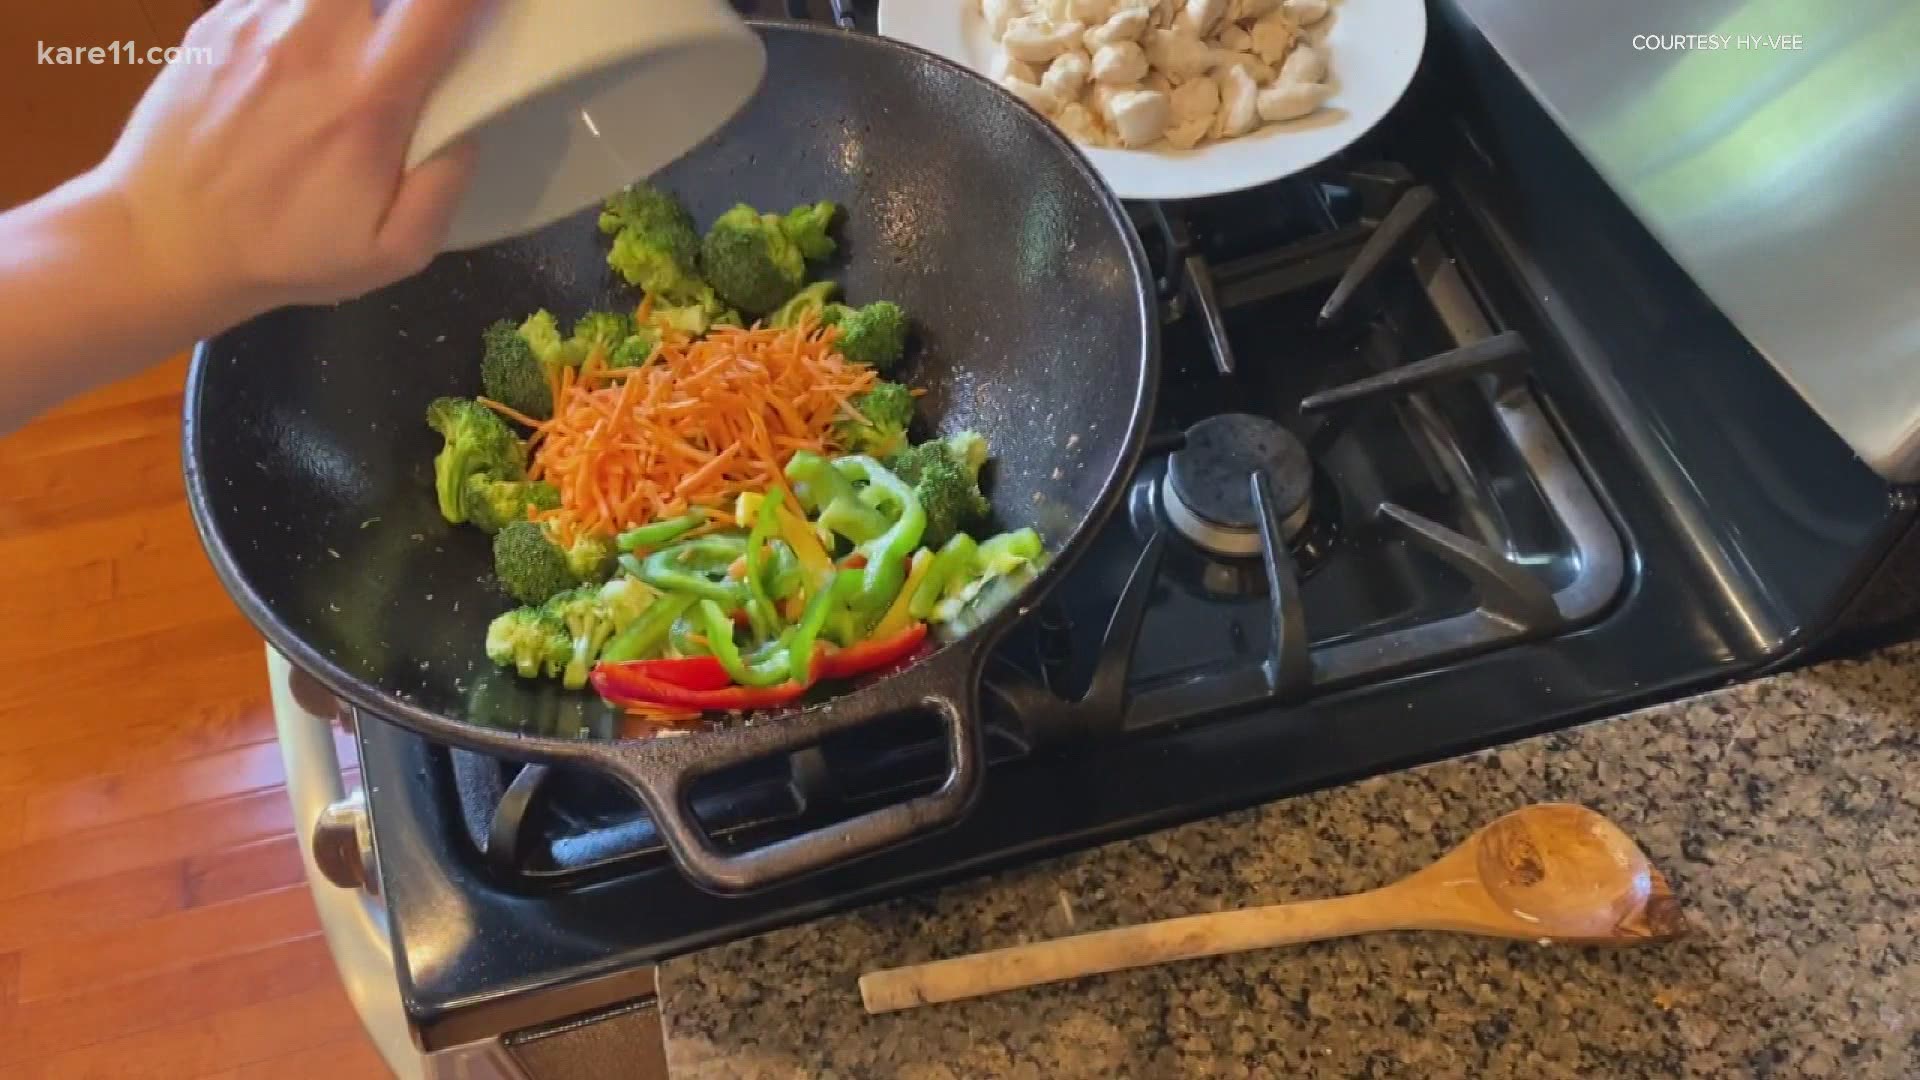 September is National Family Meals Month and HyVee nutritionist expert Melissa Jaeger is sharing a recipe to bring families together at the table